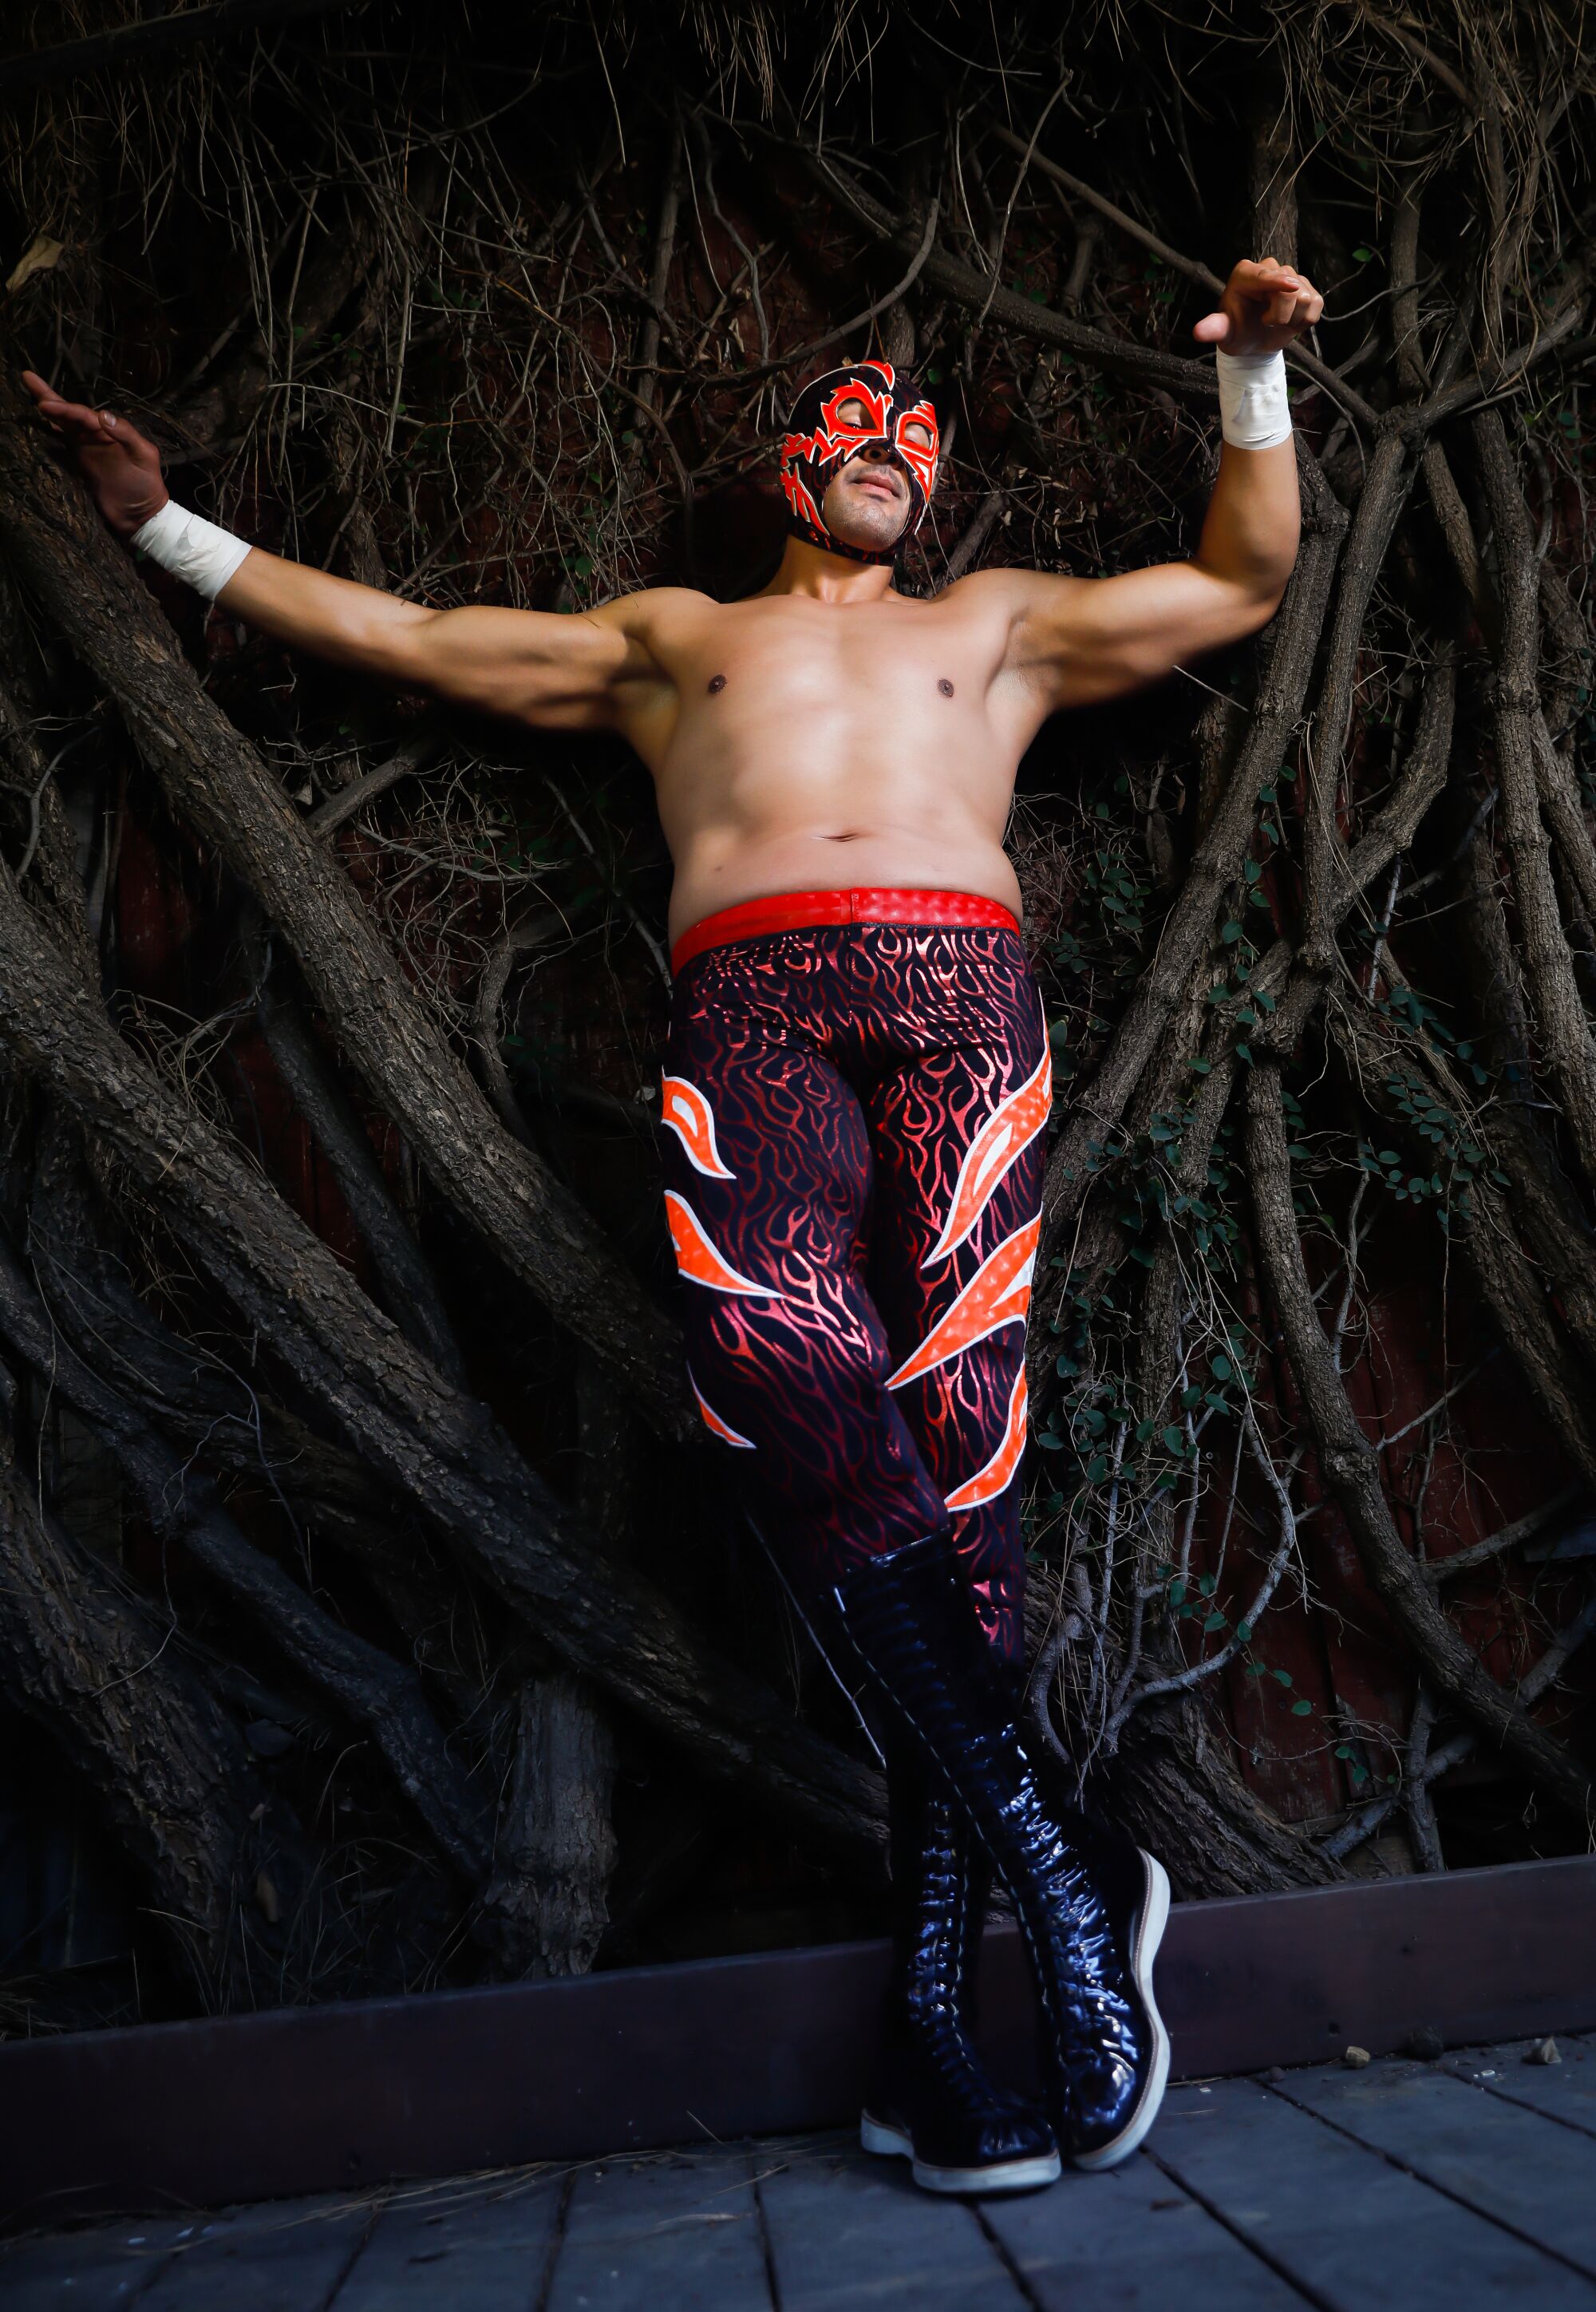 A luchador wears matching red-flame mask and tights.